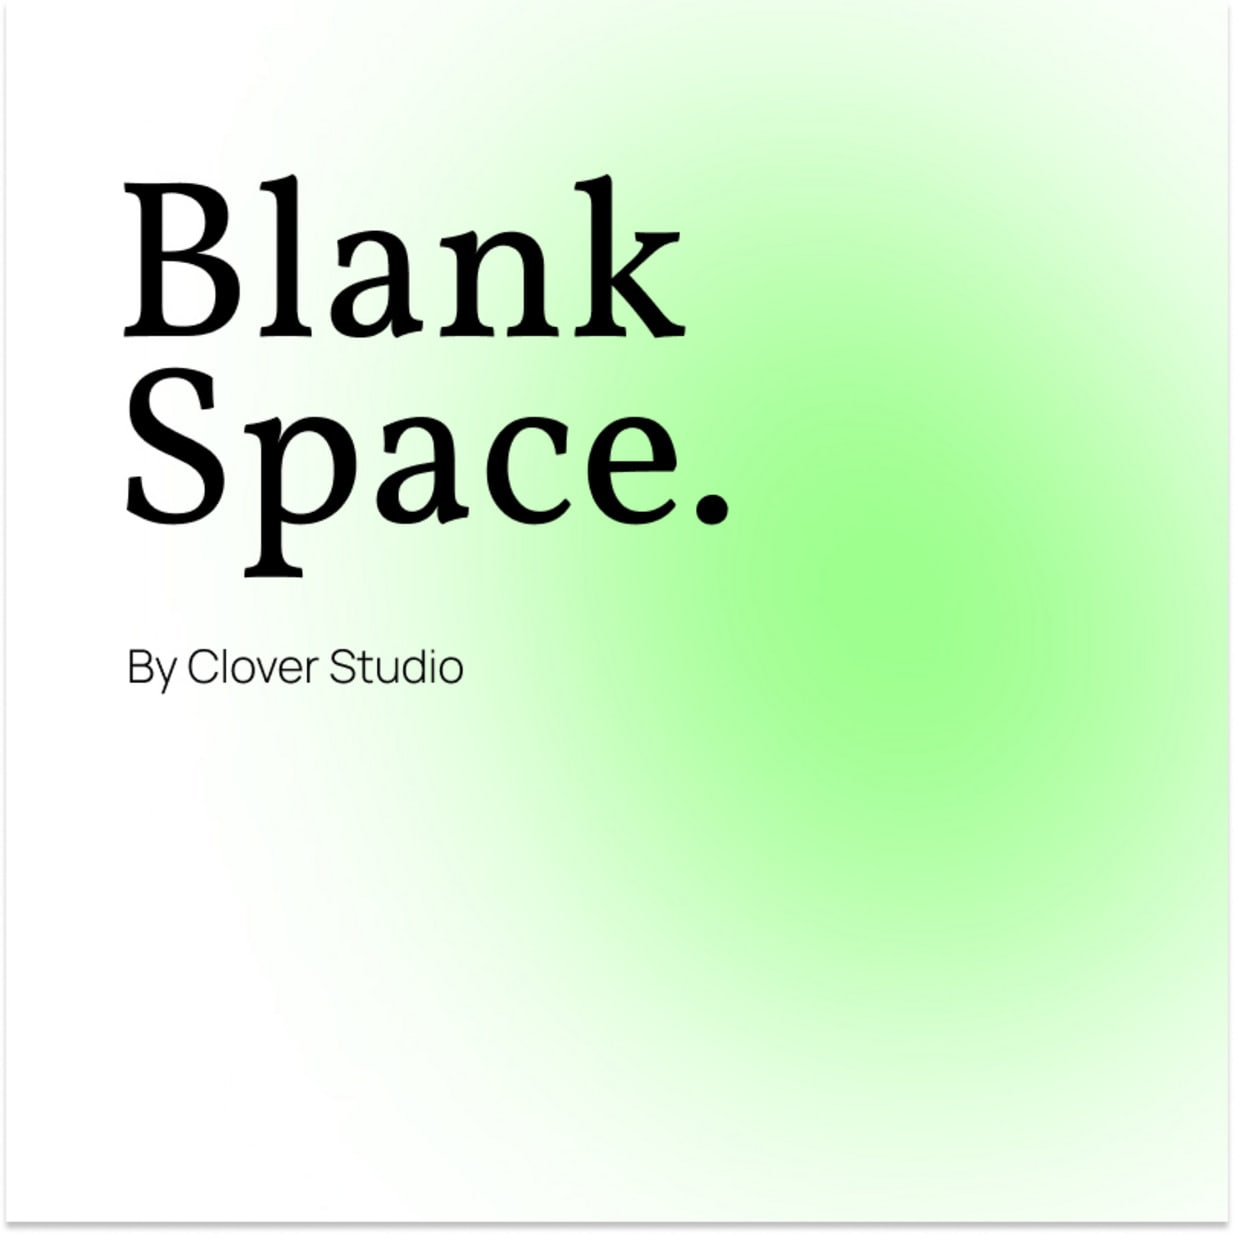 This is a image with a white background and a green halo with the tittle of the project "Blank Spaces". by Clover Studio